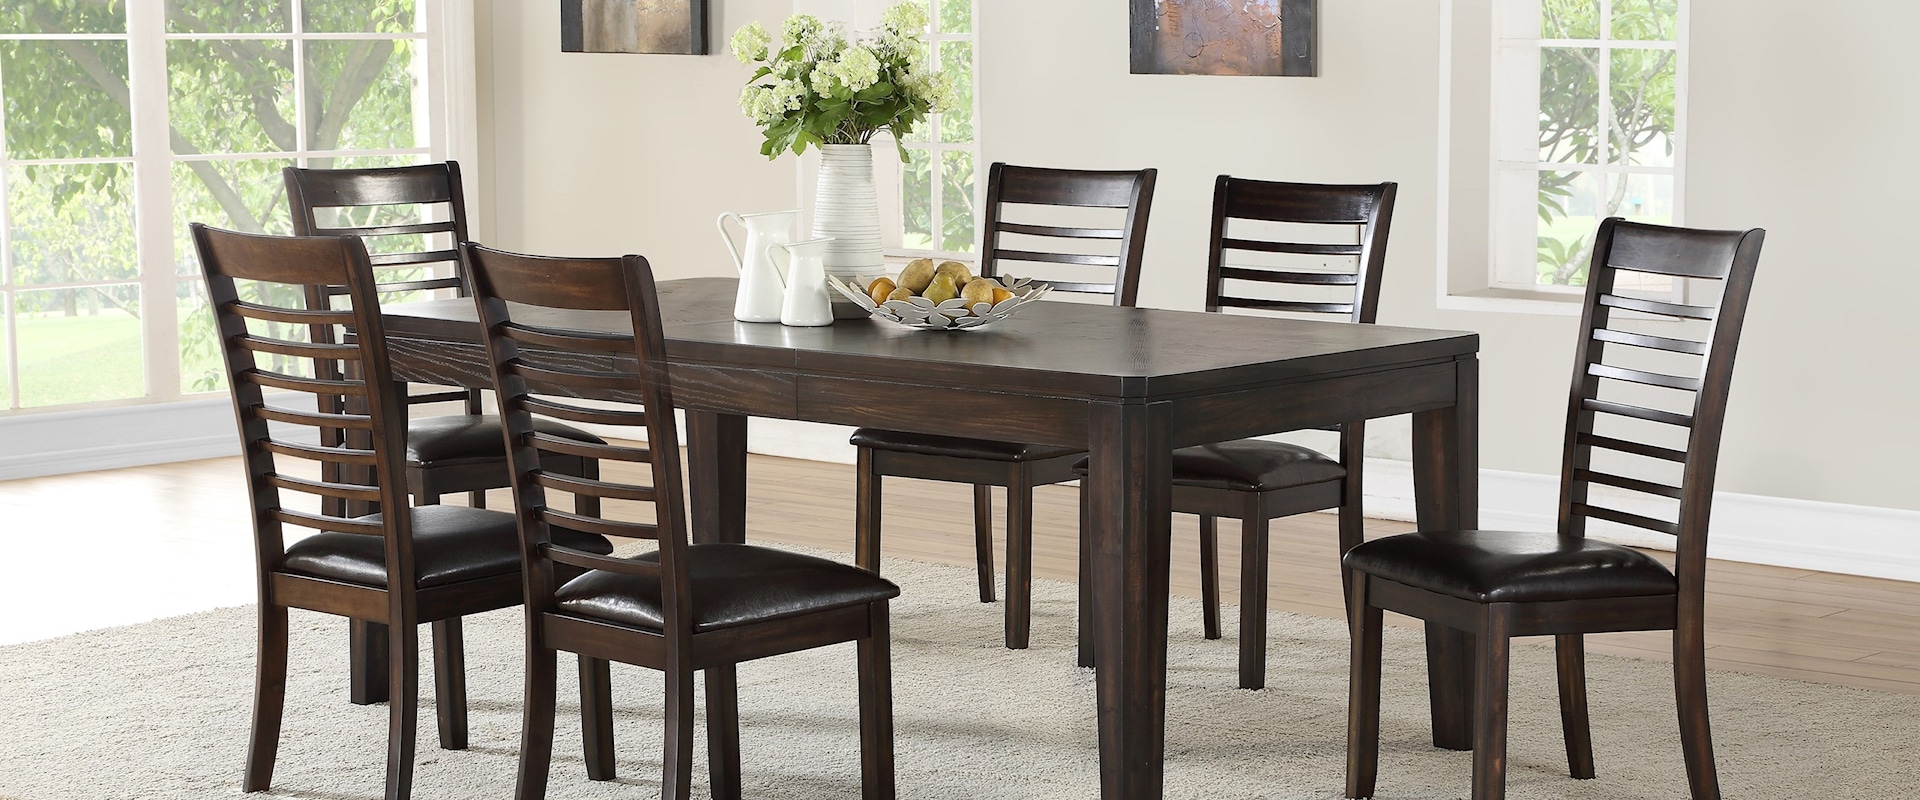 Casual 7 Piece Table and Upholstered Chair Set